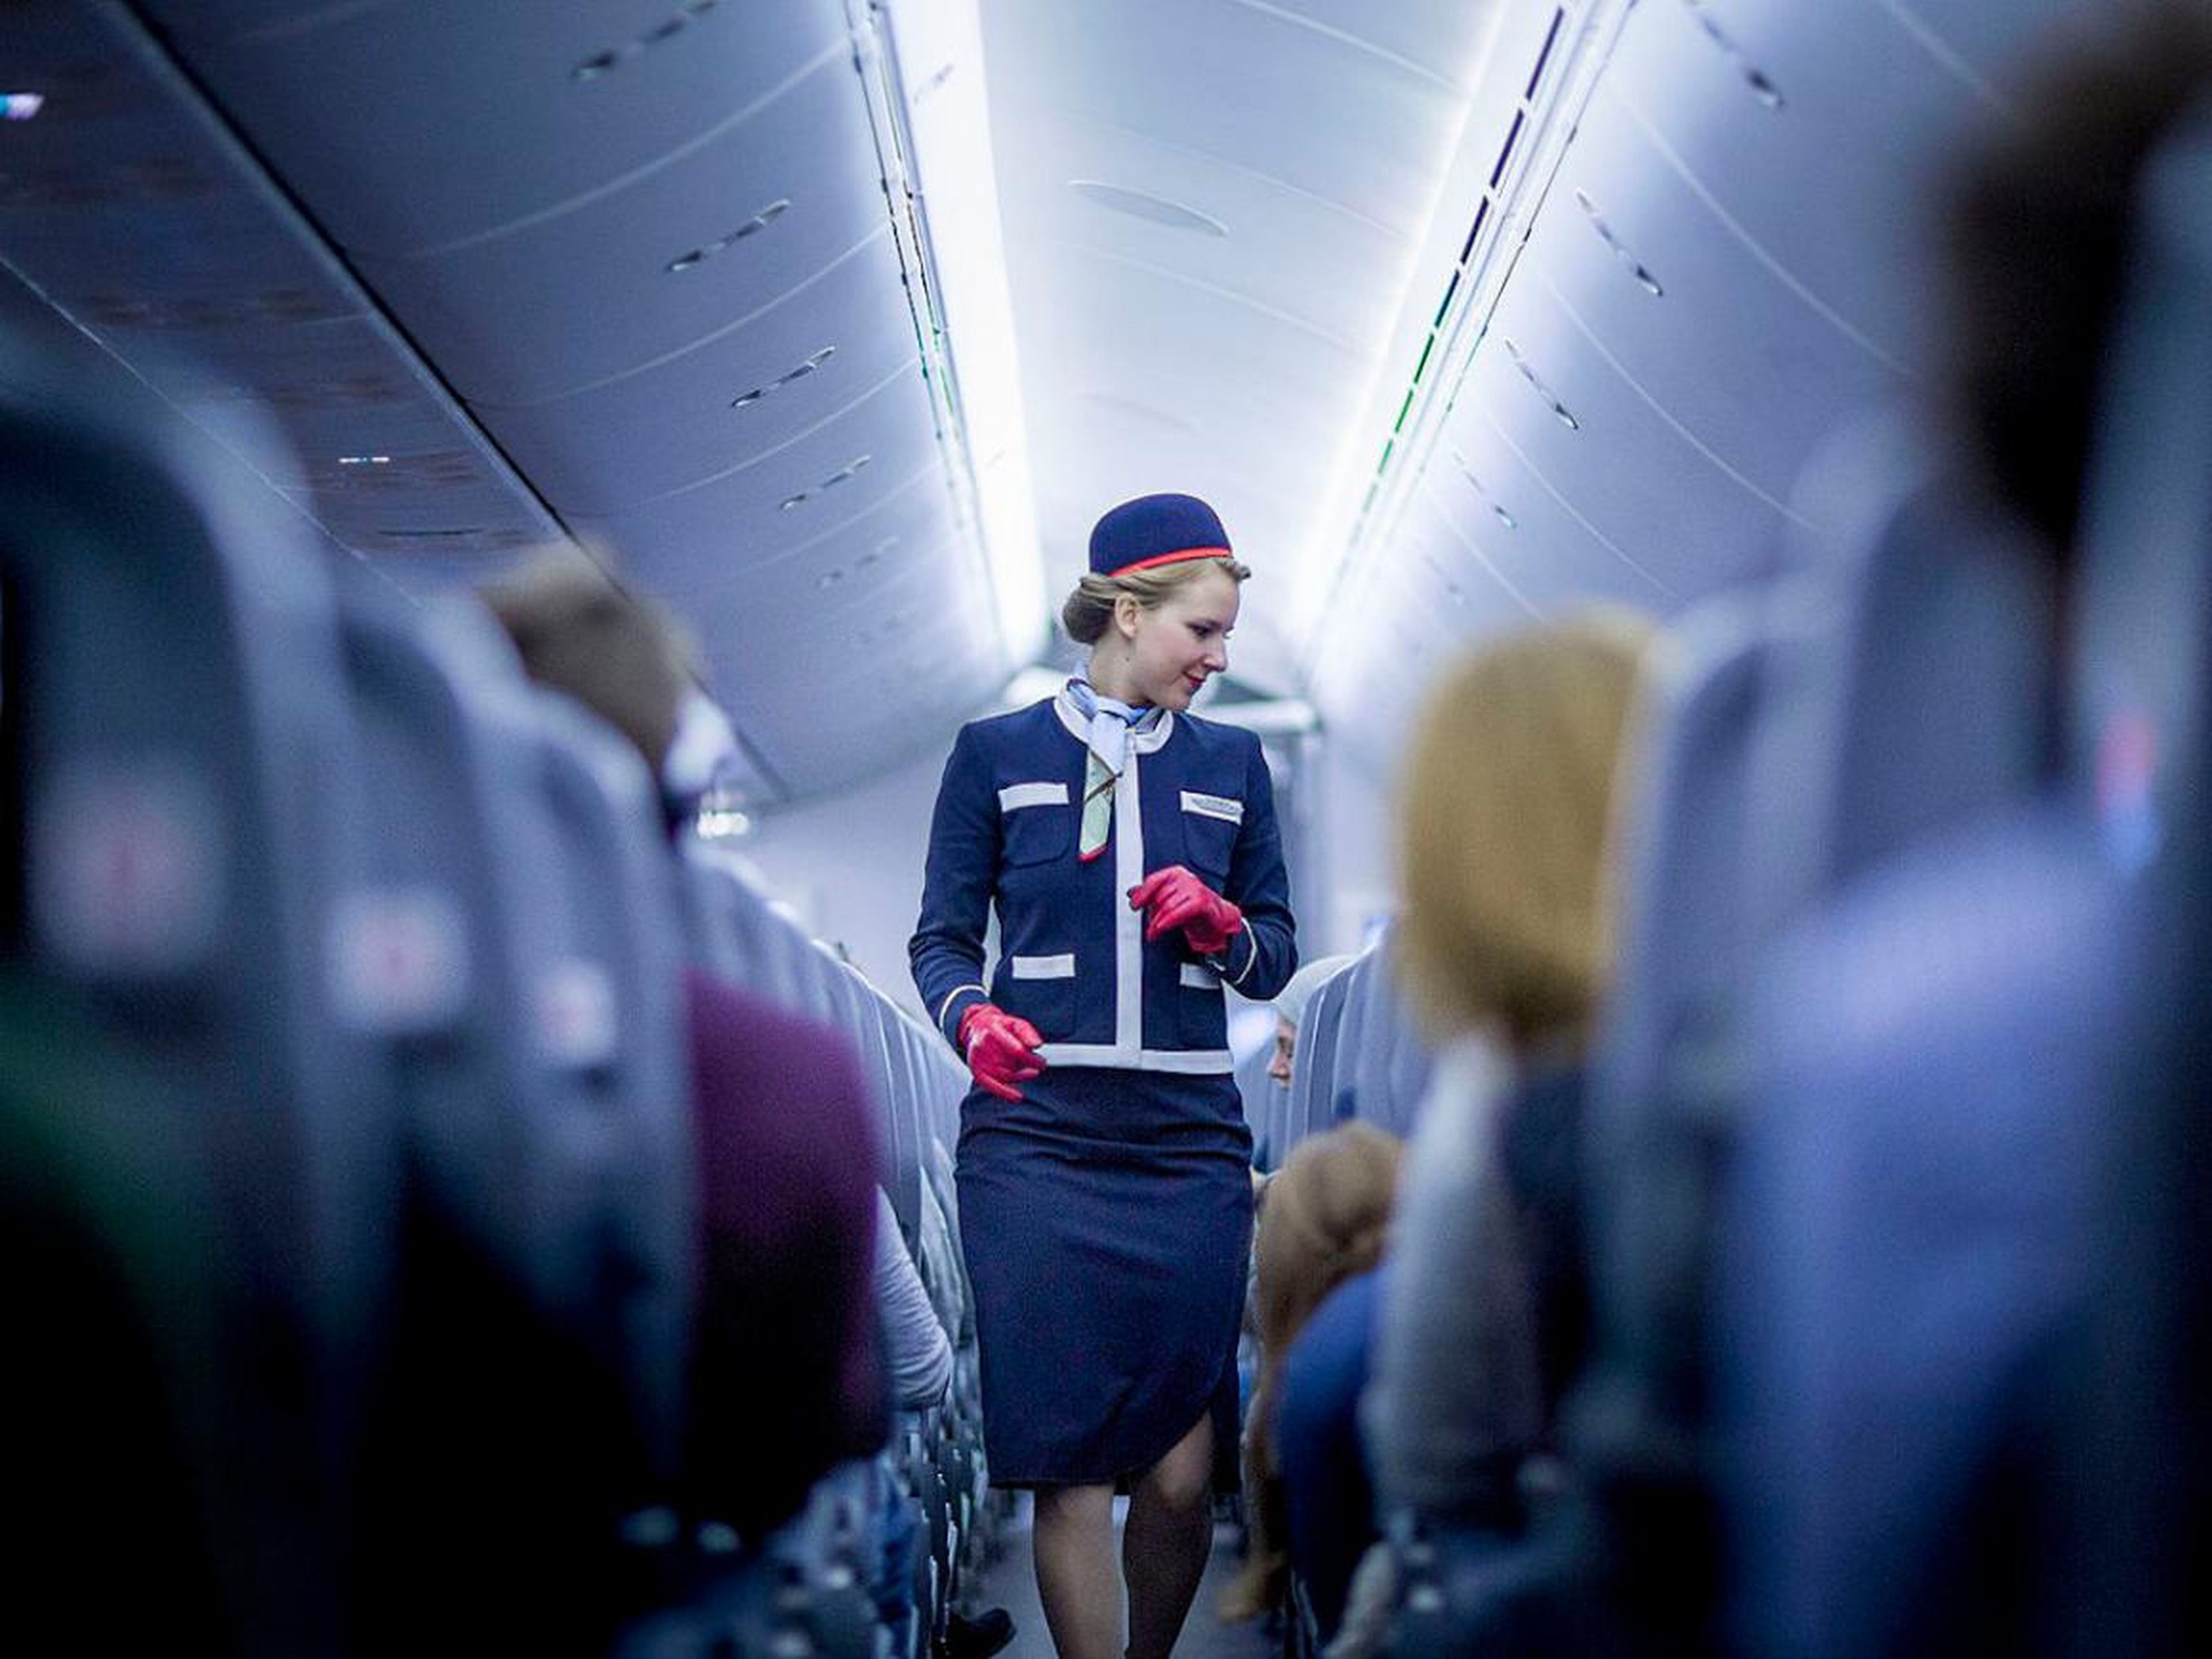 But the job isn't a constant glitzy adventure, even if you're working in first class. The job can be frustrating, as many passengers dismiss flight attendants as "waiters and waitresses on a plane," according to longtime Delta